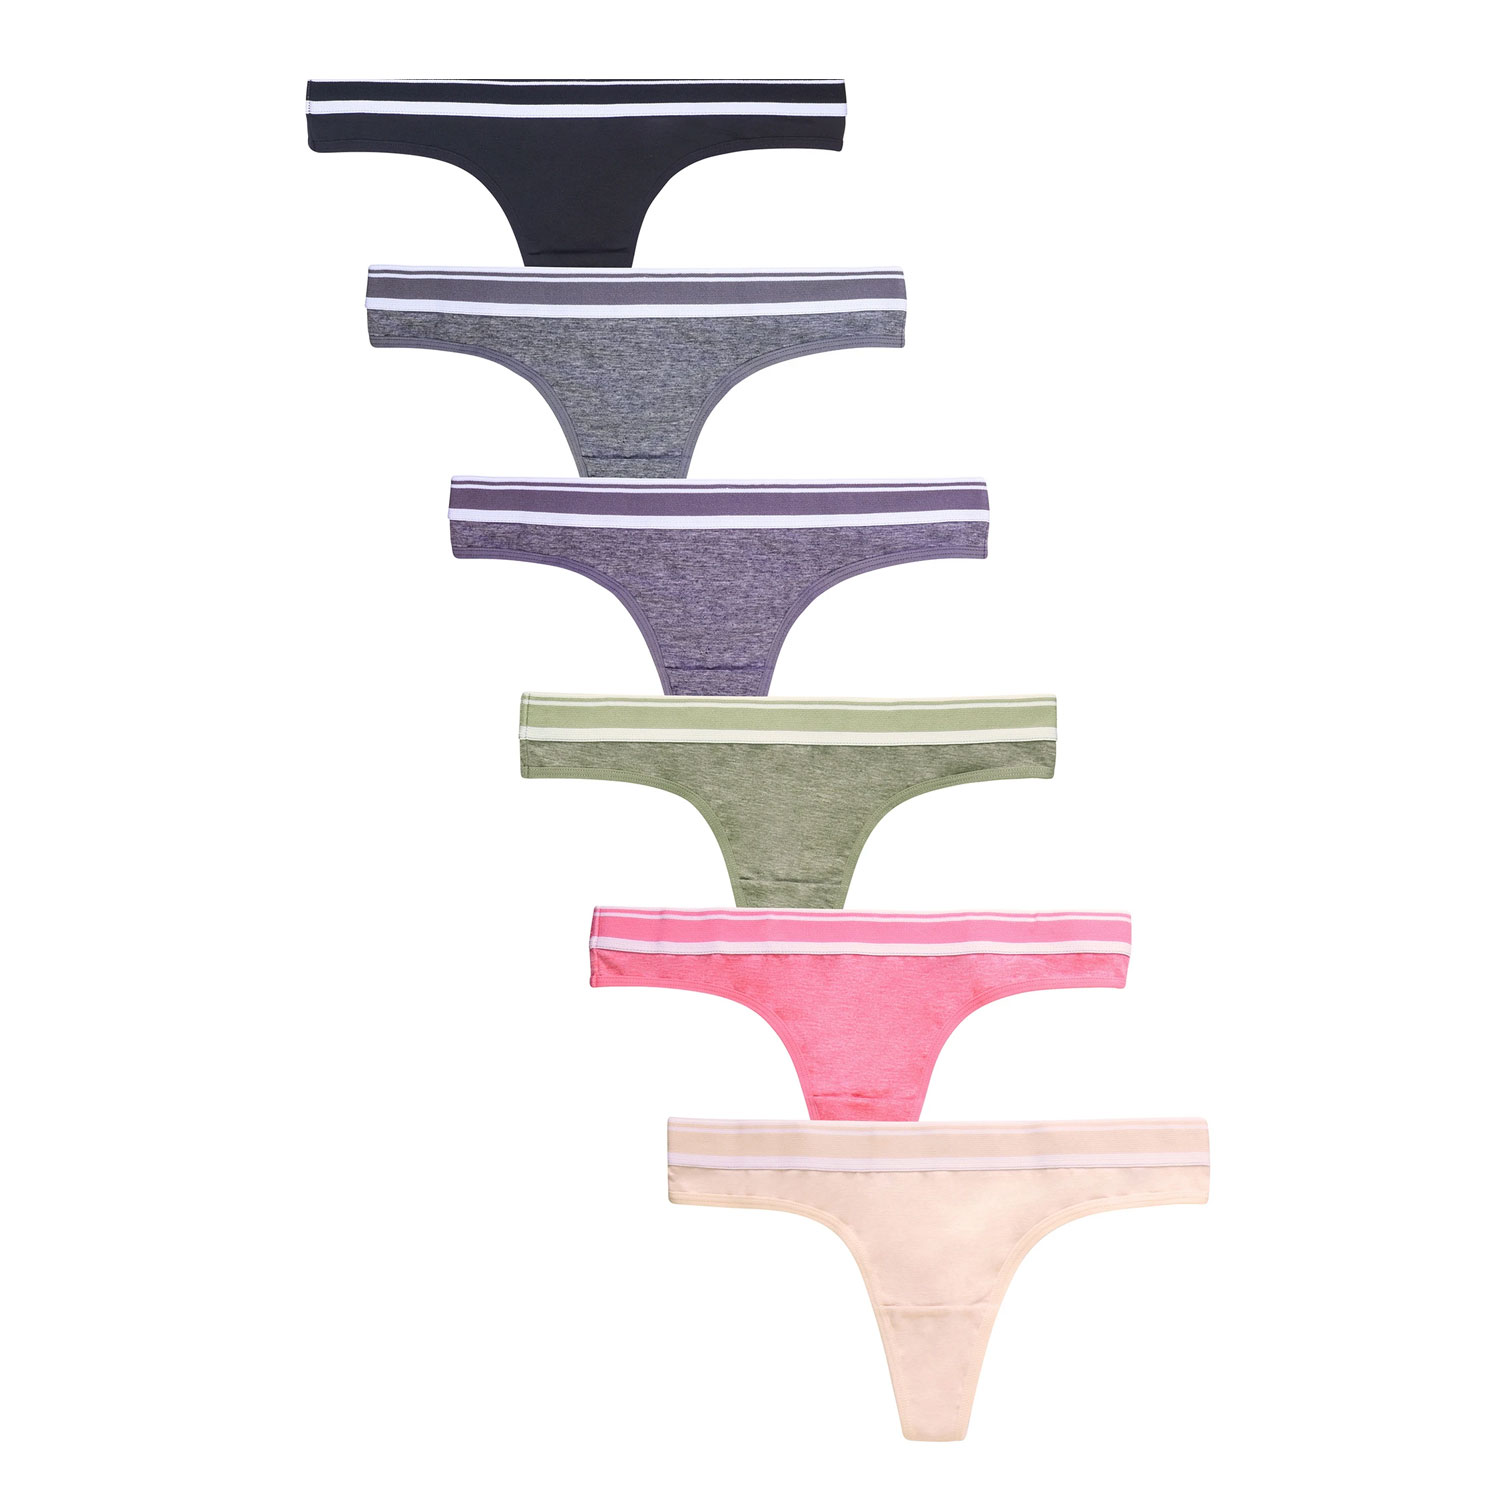 Cotton Thong Panty And Boyshorts Pack Of 6 And 12